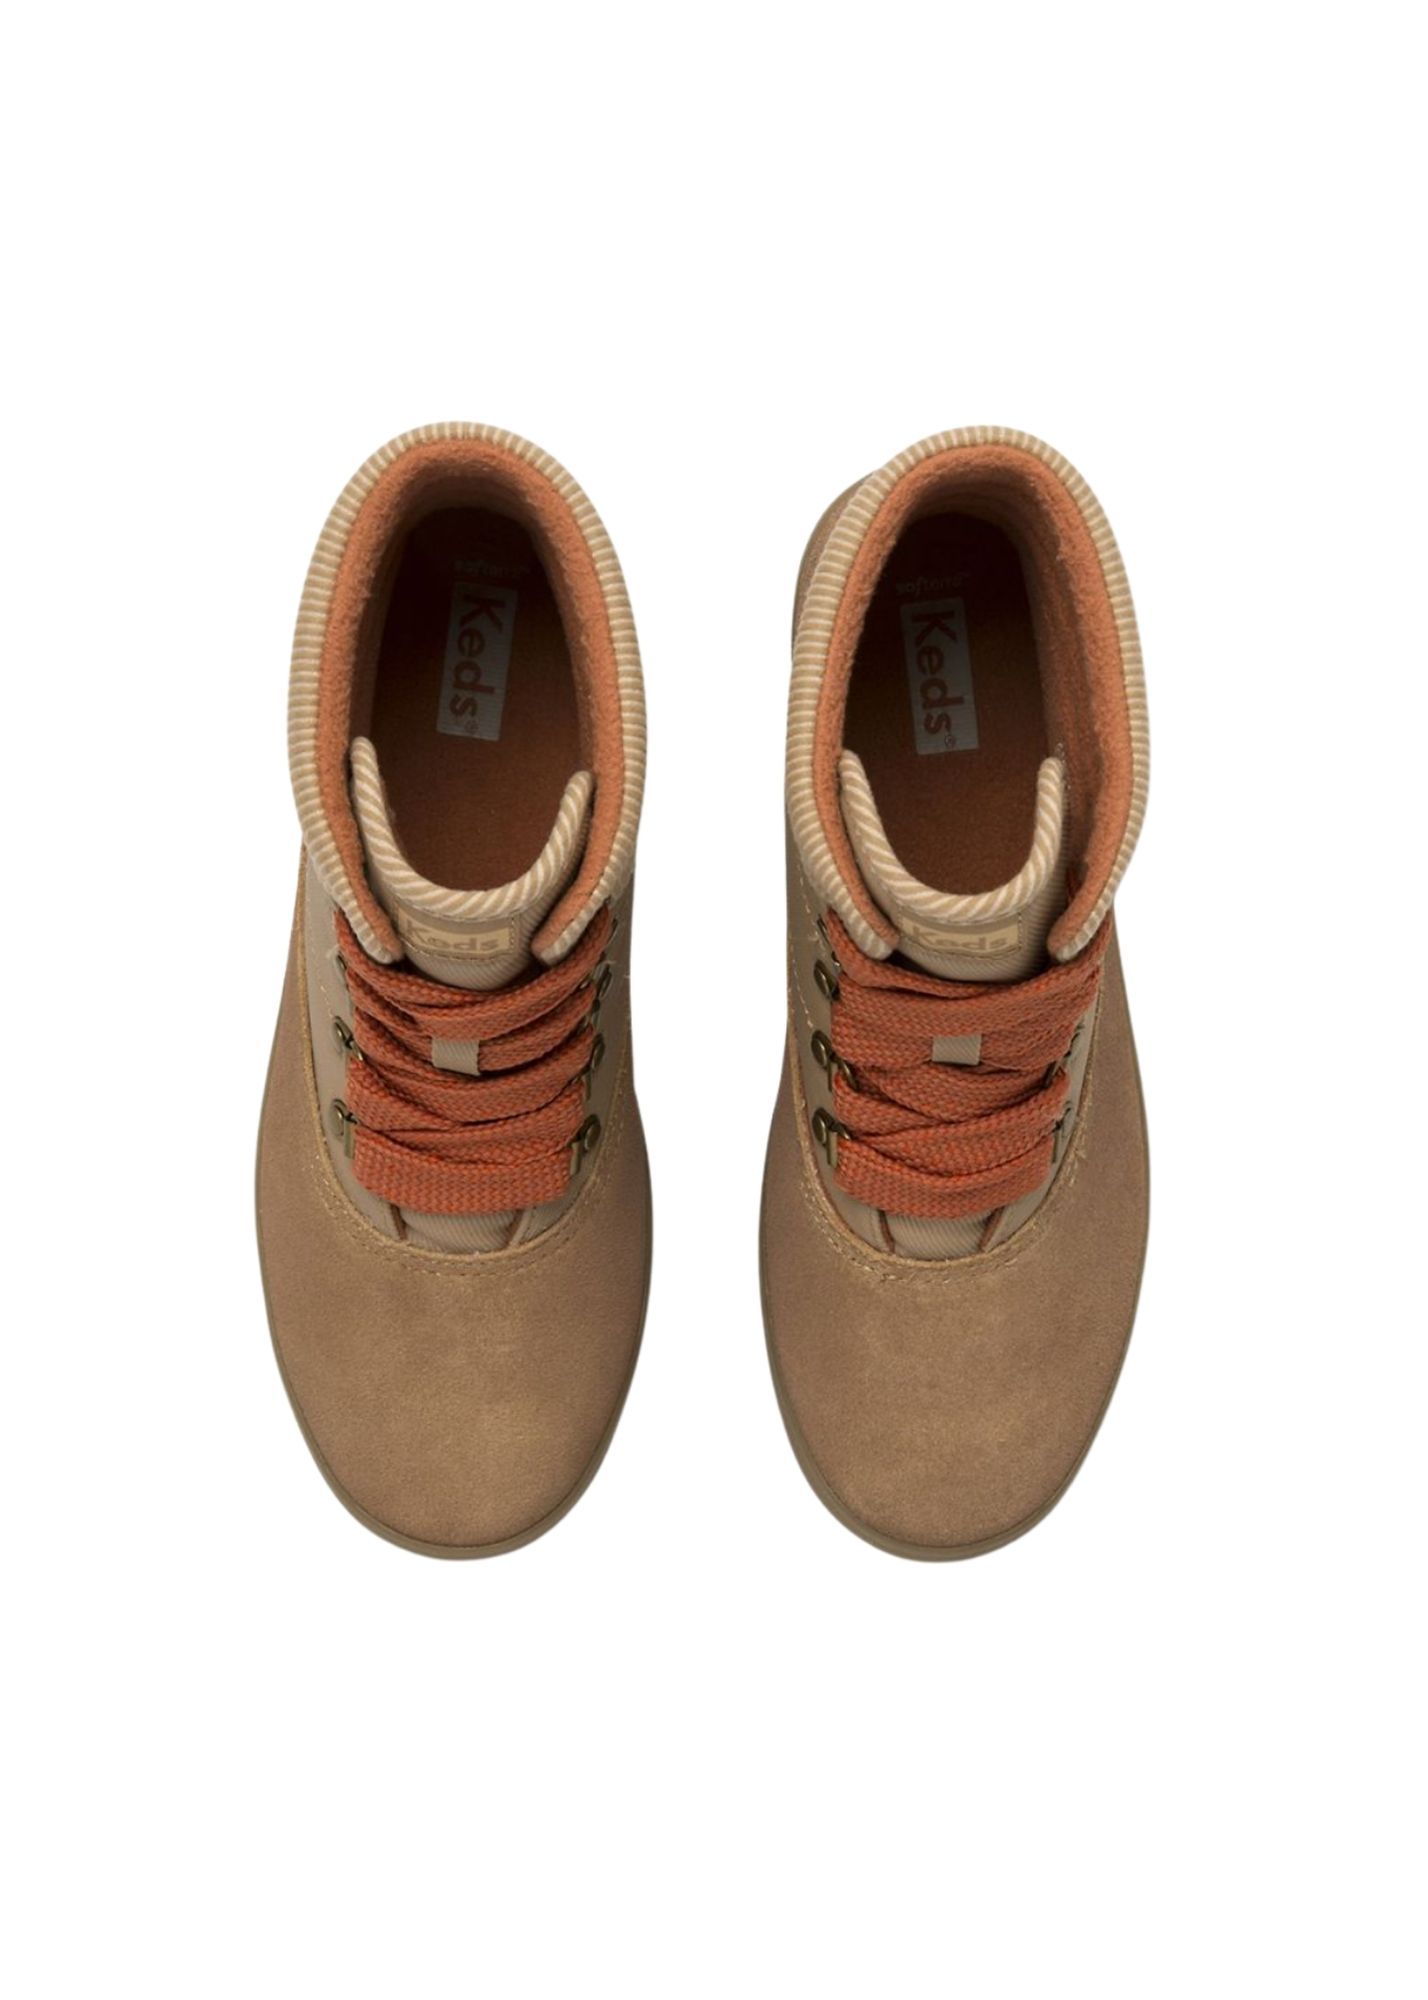 Keds Camp Boot Suede & Splash Twill w/ Thinsulate™-FINAL SALE Shoes Keds